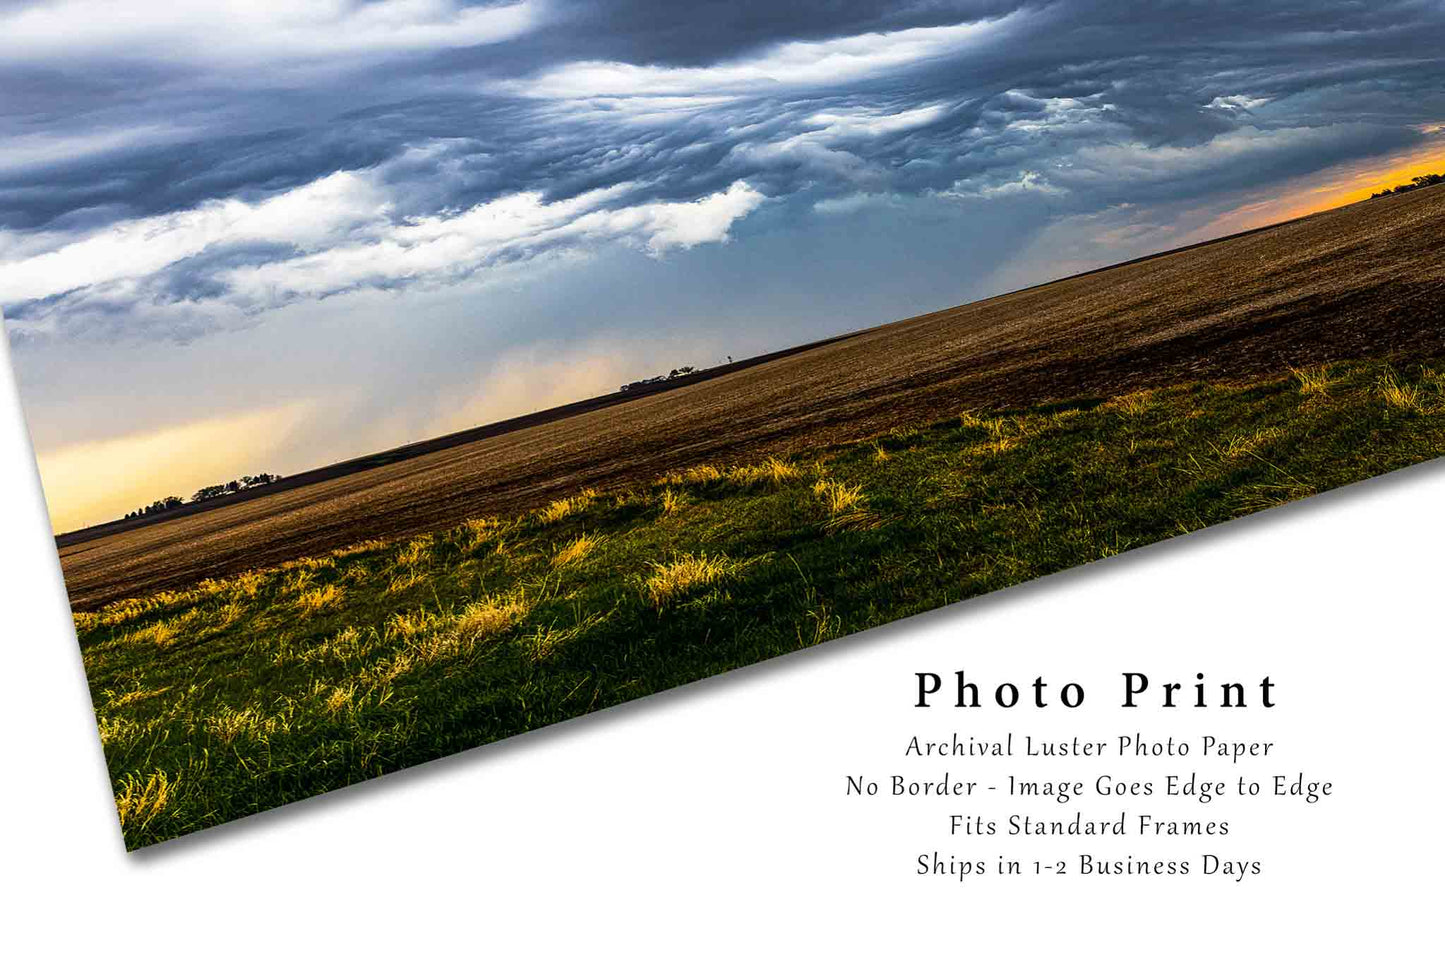 Thunderstorm Photography Print - Picture of Dramatic Storm Clouds Over Farmland on Stormy Day in Iowa Weather Wall Art Midwestern Decor